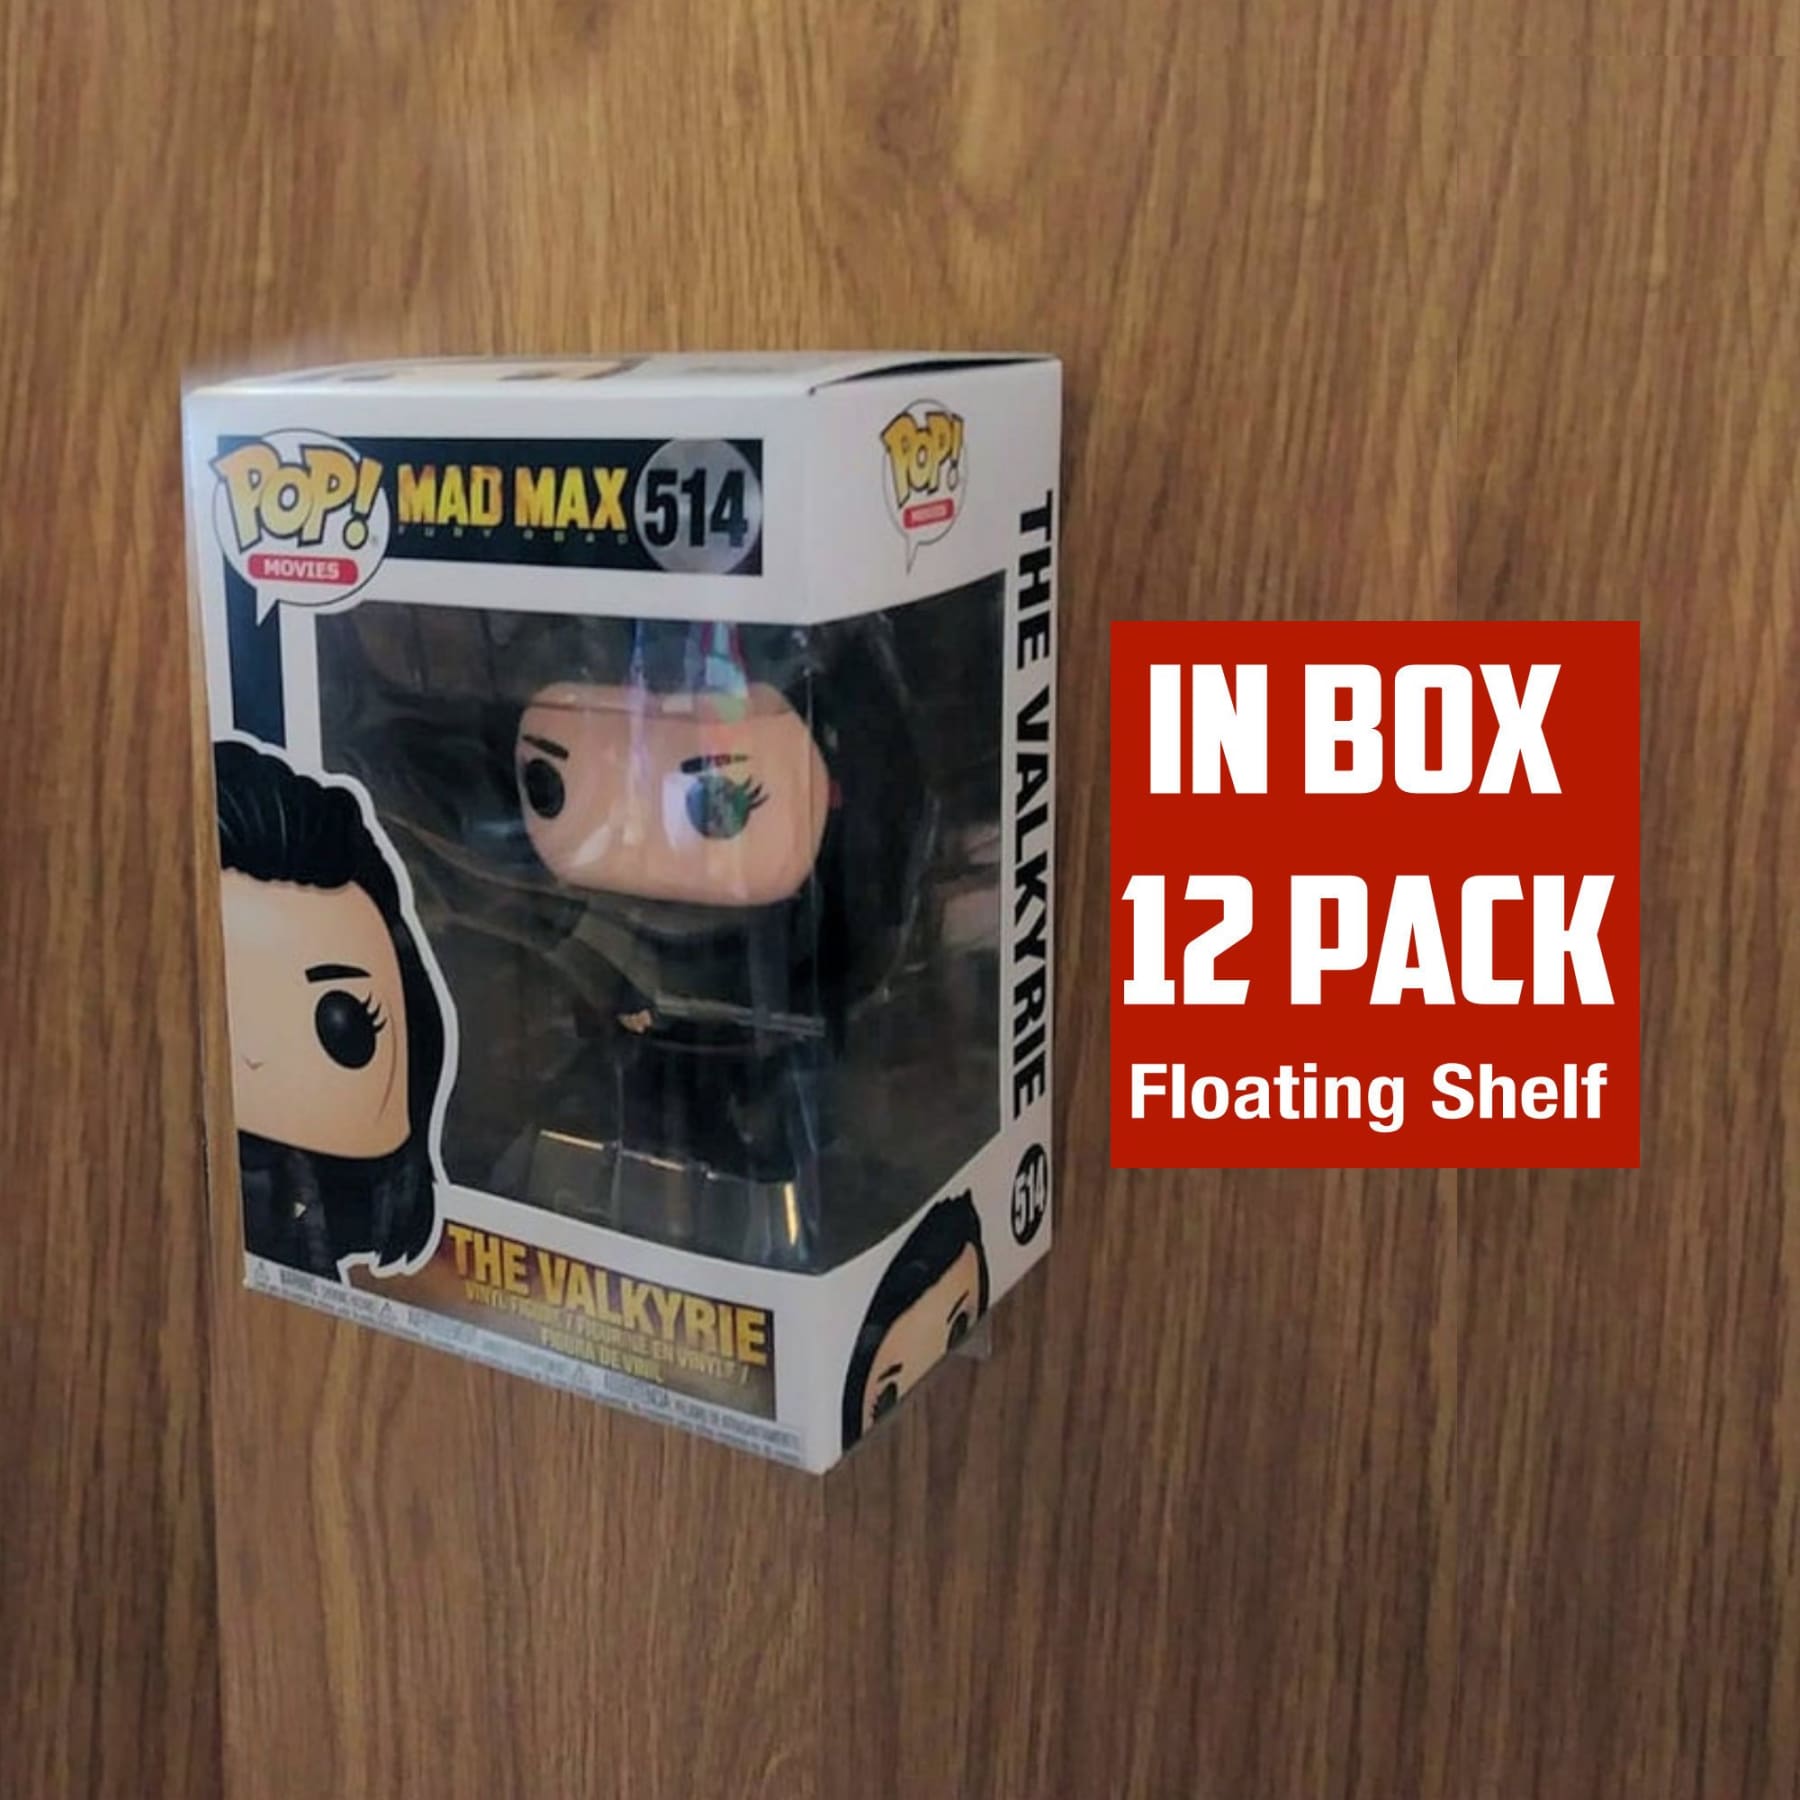 12 Pack For in Box Funko Pop Vinyl: Clear Acrylic Wall Stand, Stick On, Single Floating Shelf less, No Nails or Screws